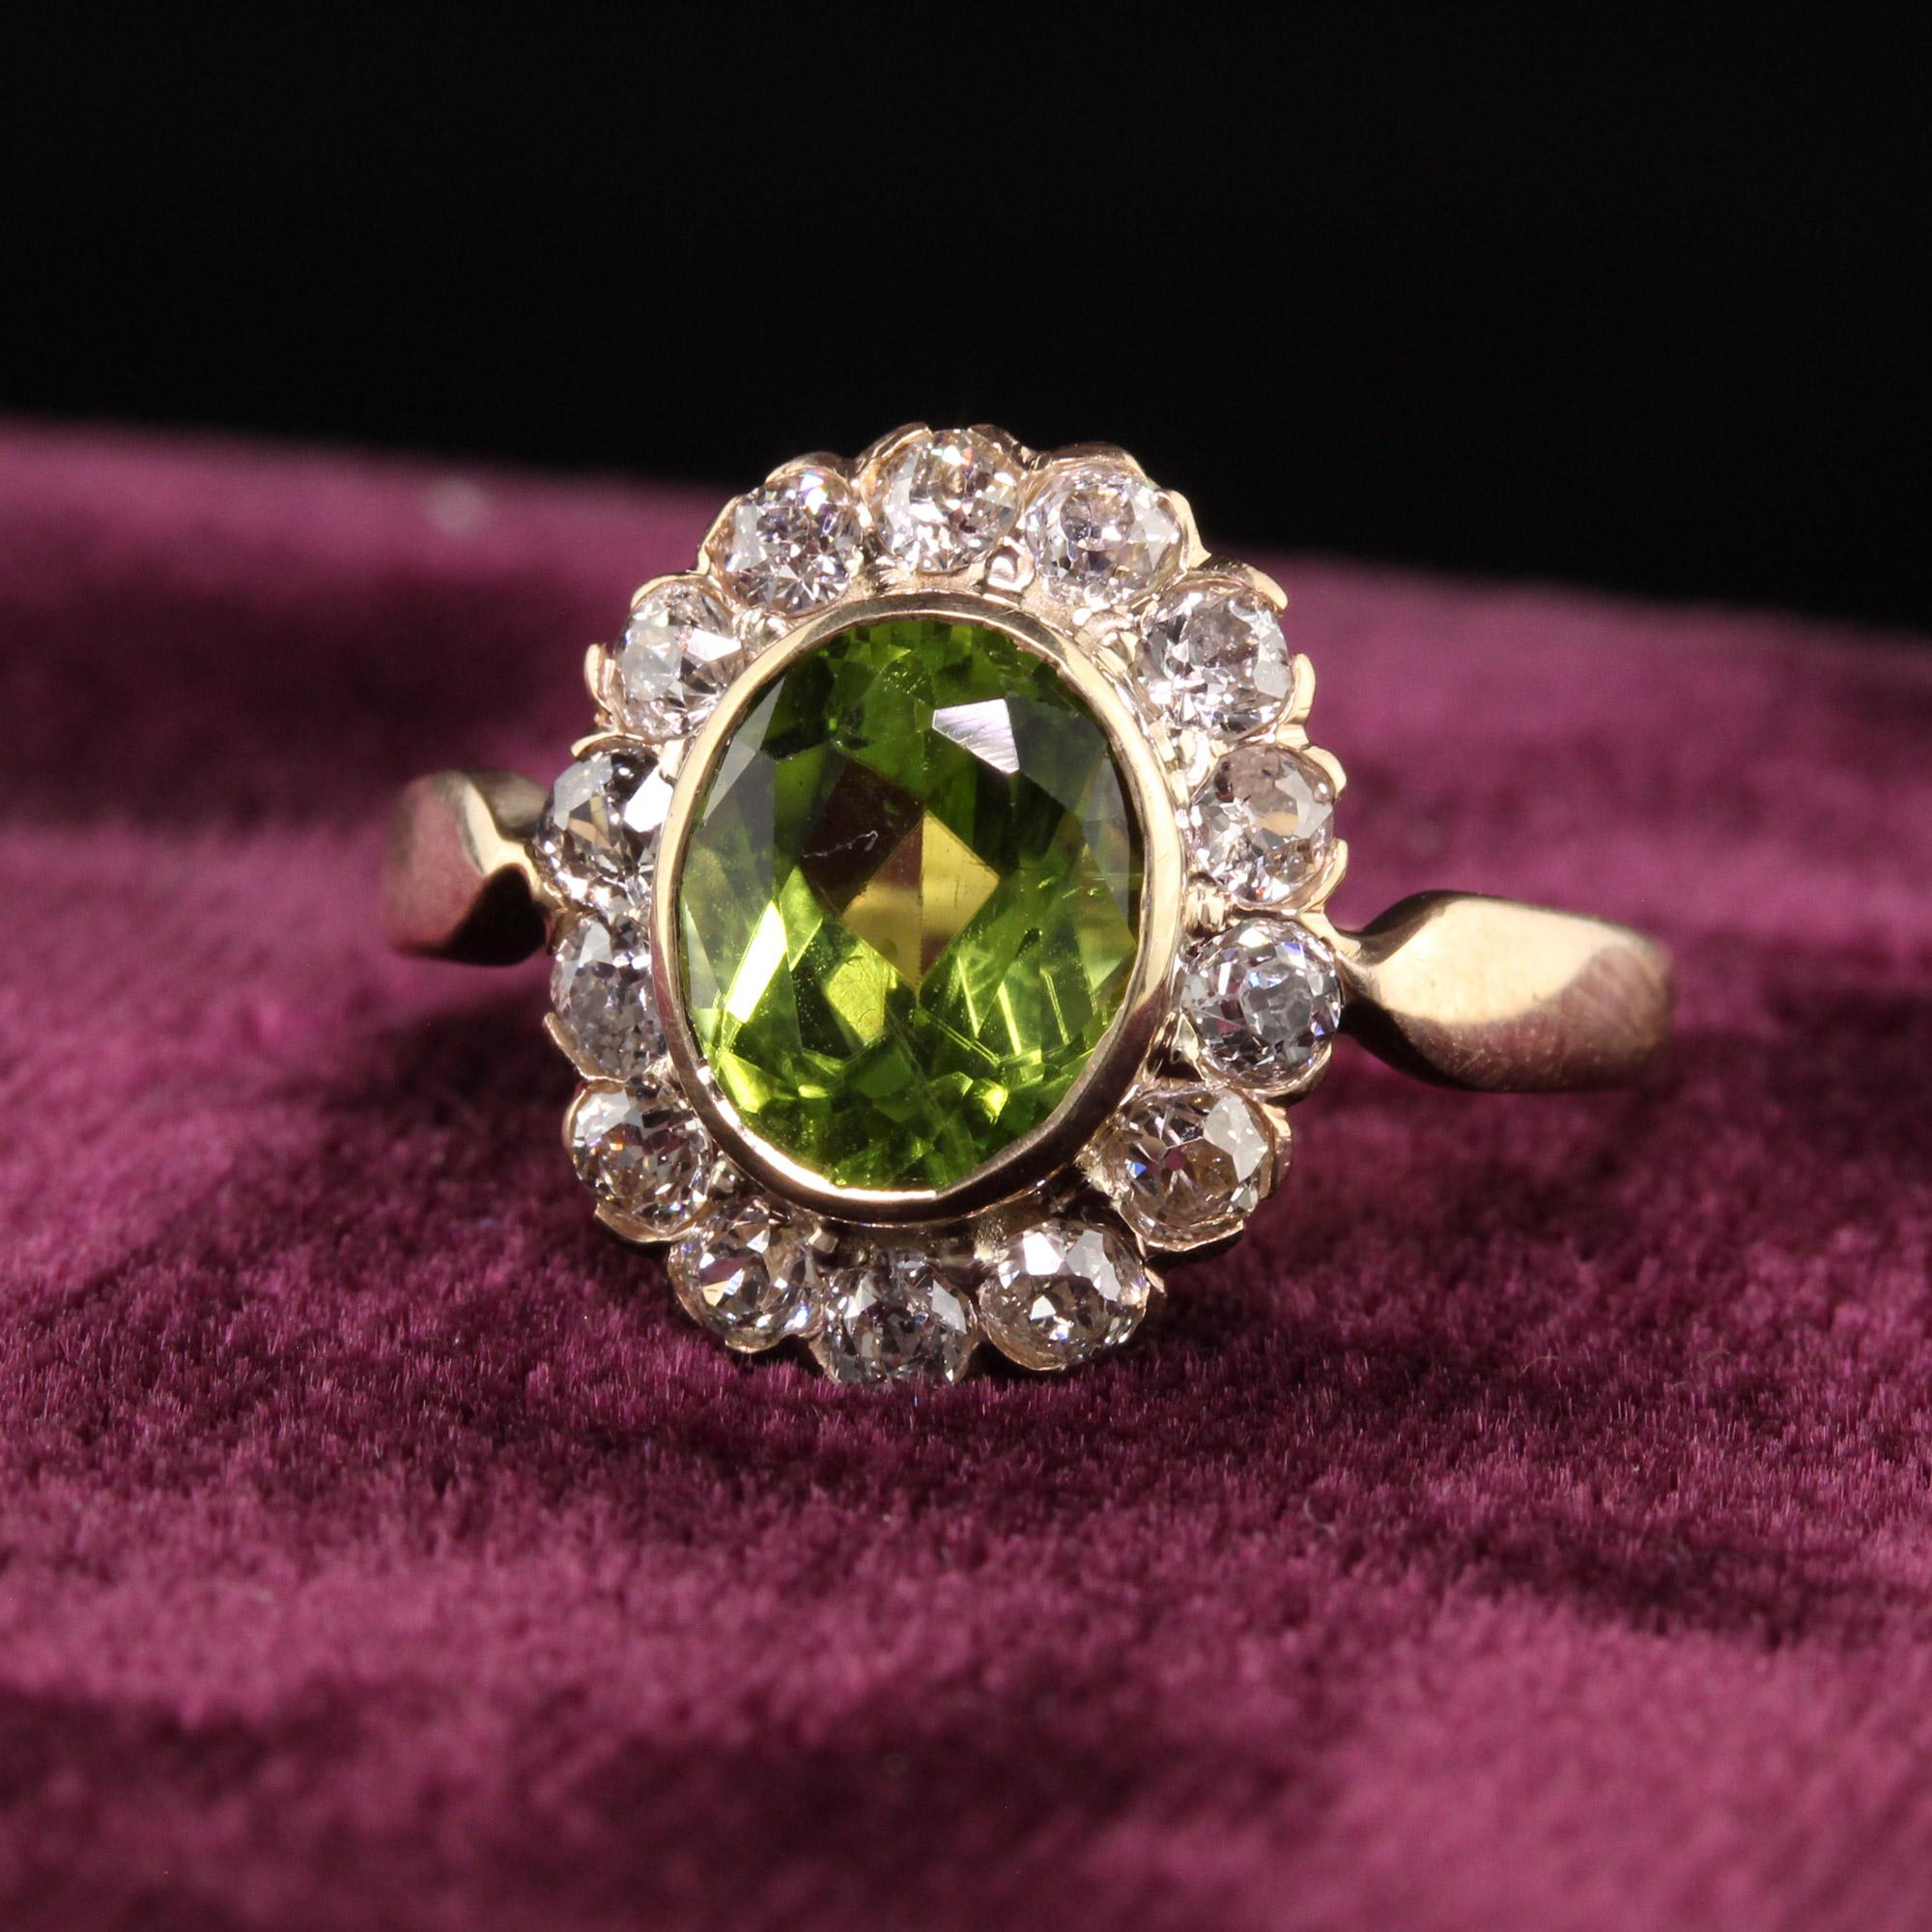 Beautiful Antique Victorian 14K Yellow Gold Old Mine Diamond and Peridot Ring. This gorgeous Victorian peridot ring has old mine cut diamonds surrounding a center peridot with a beautiful green color. It sits low on the finger and very